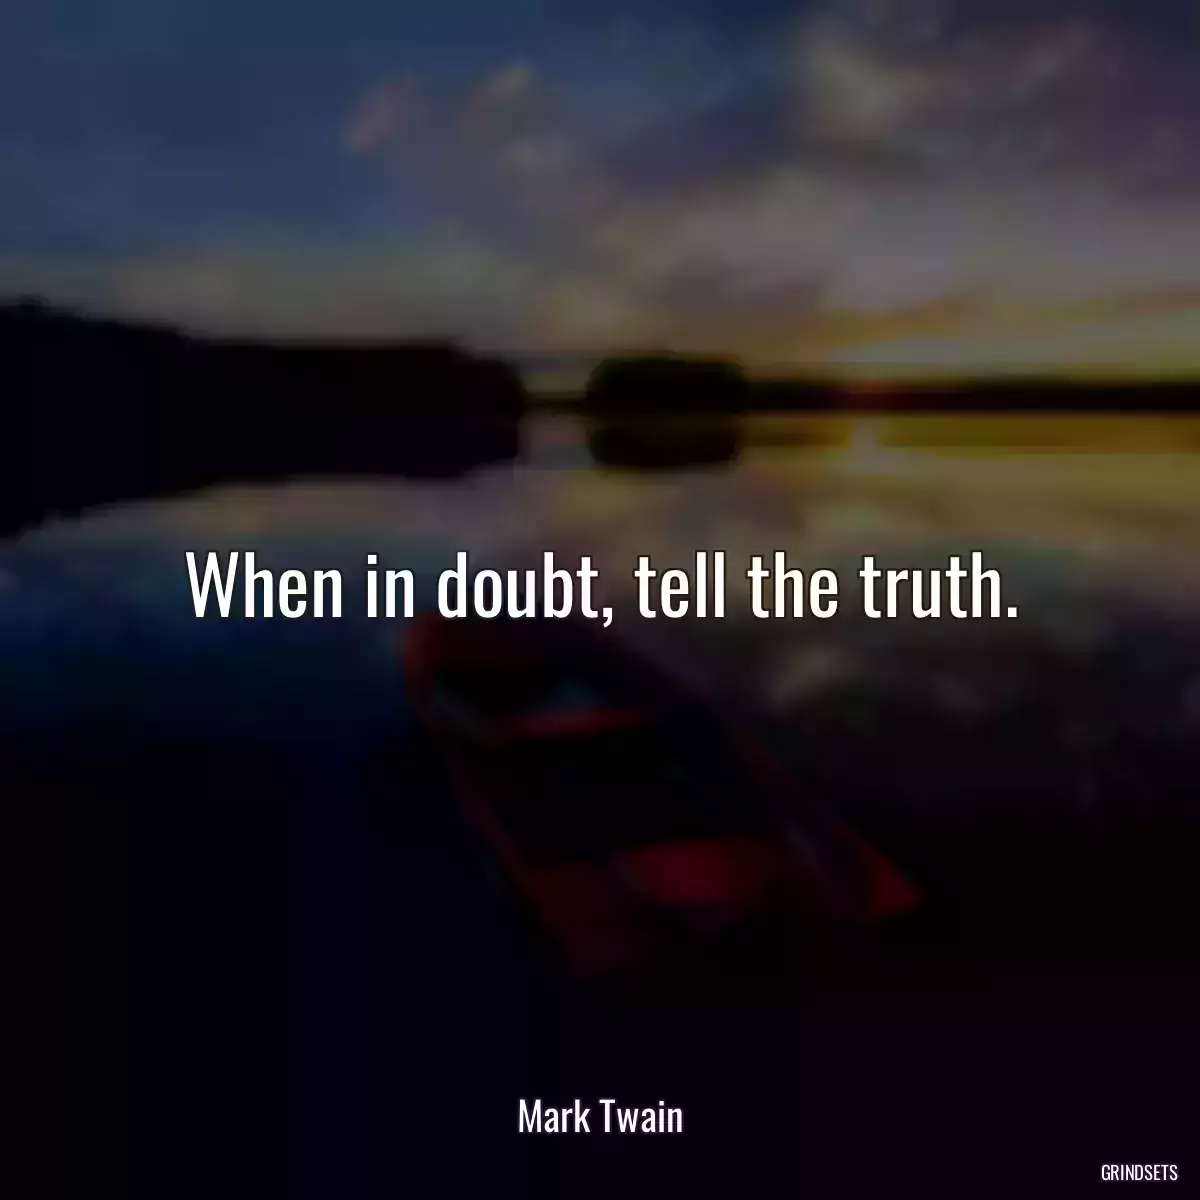 When in doubt, tell the truth.